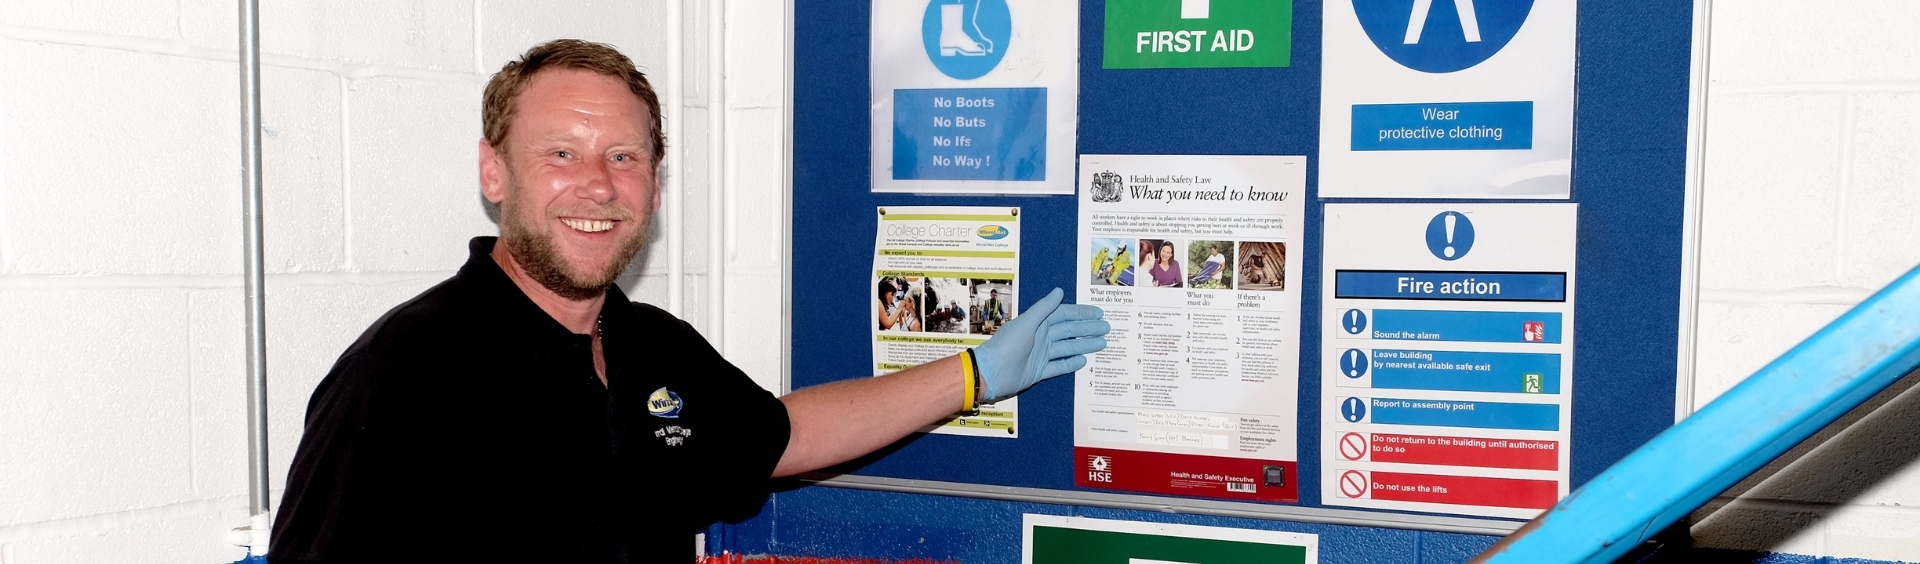 WMC Health and Safety in the Workplace student pointing at noticeboard in classroom